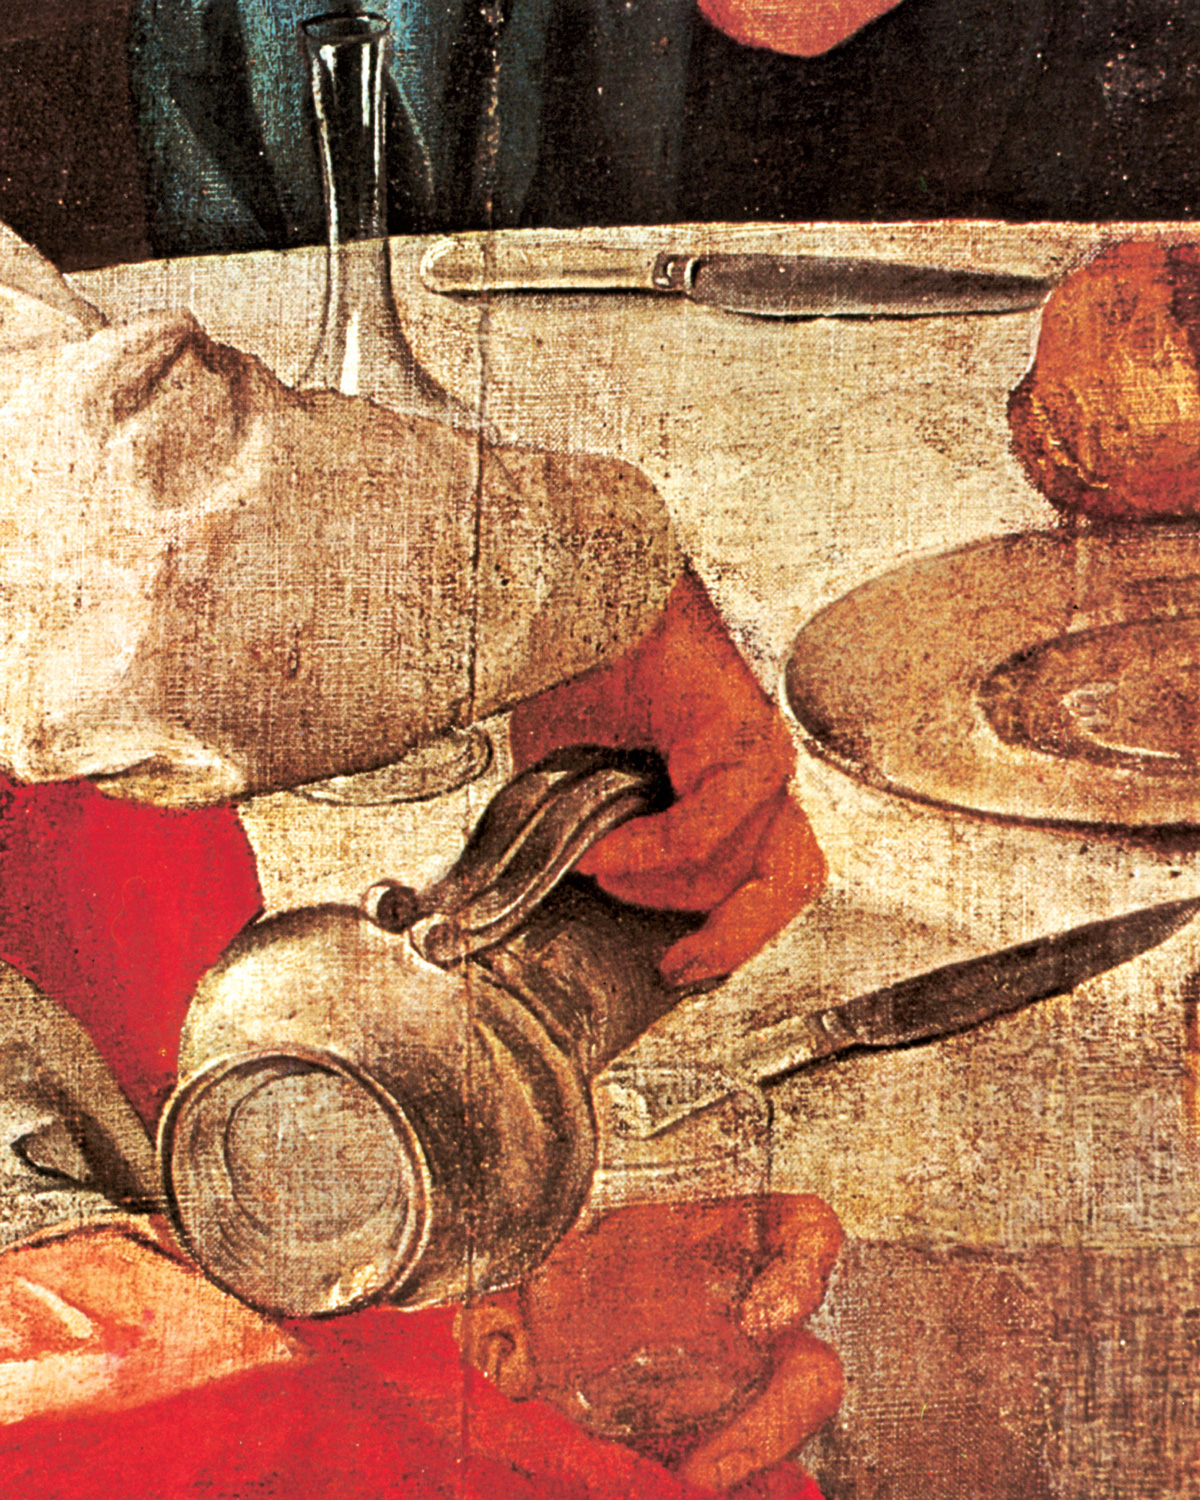 A detail of hands pouring water into a glass from Pontormo’s 1525 painting titled “Supper at Emmaus.”